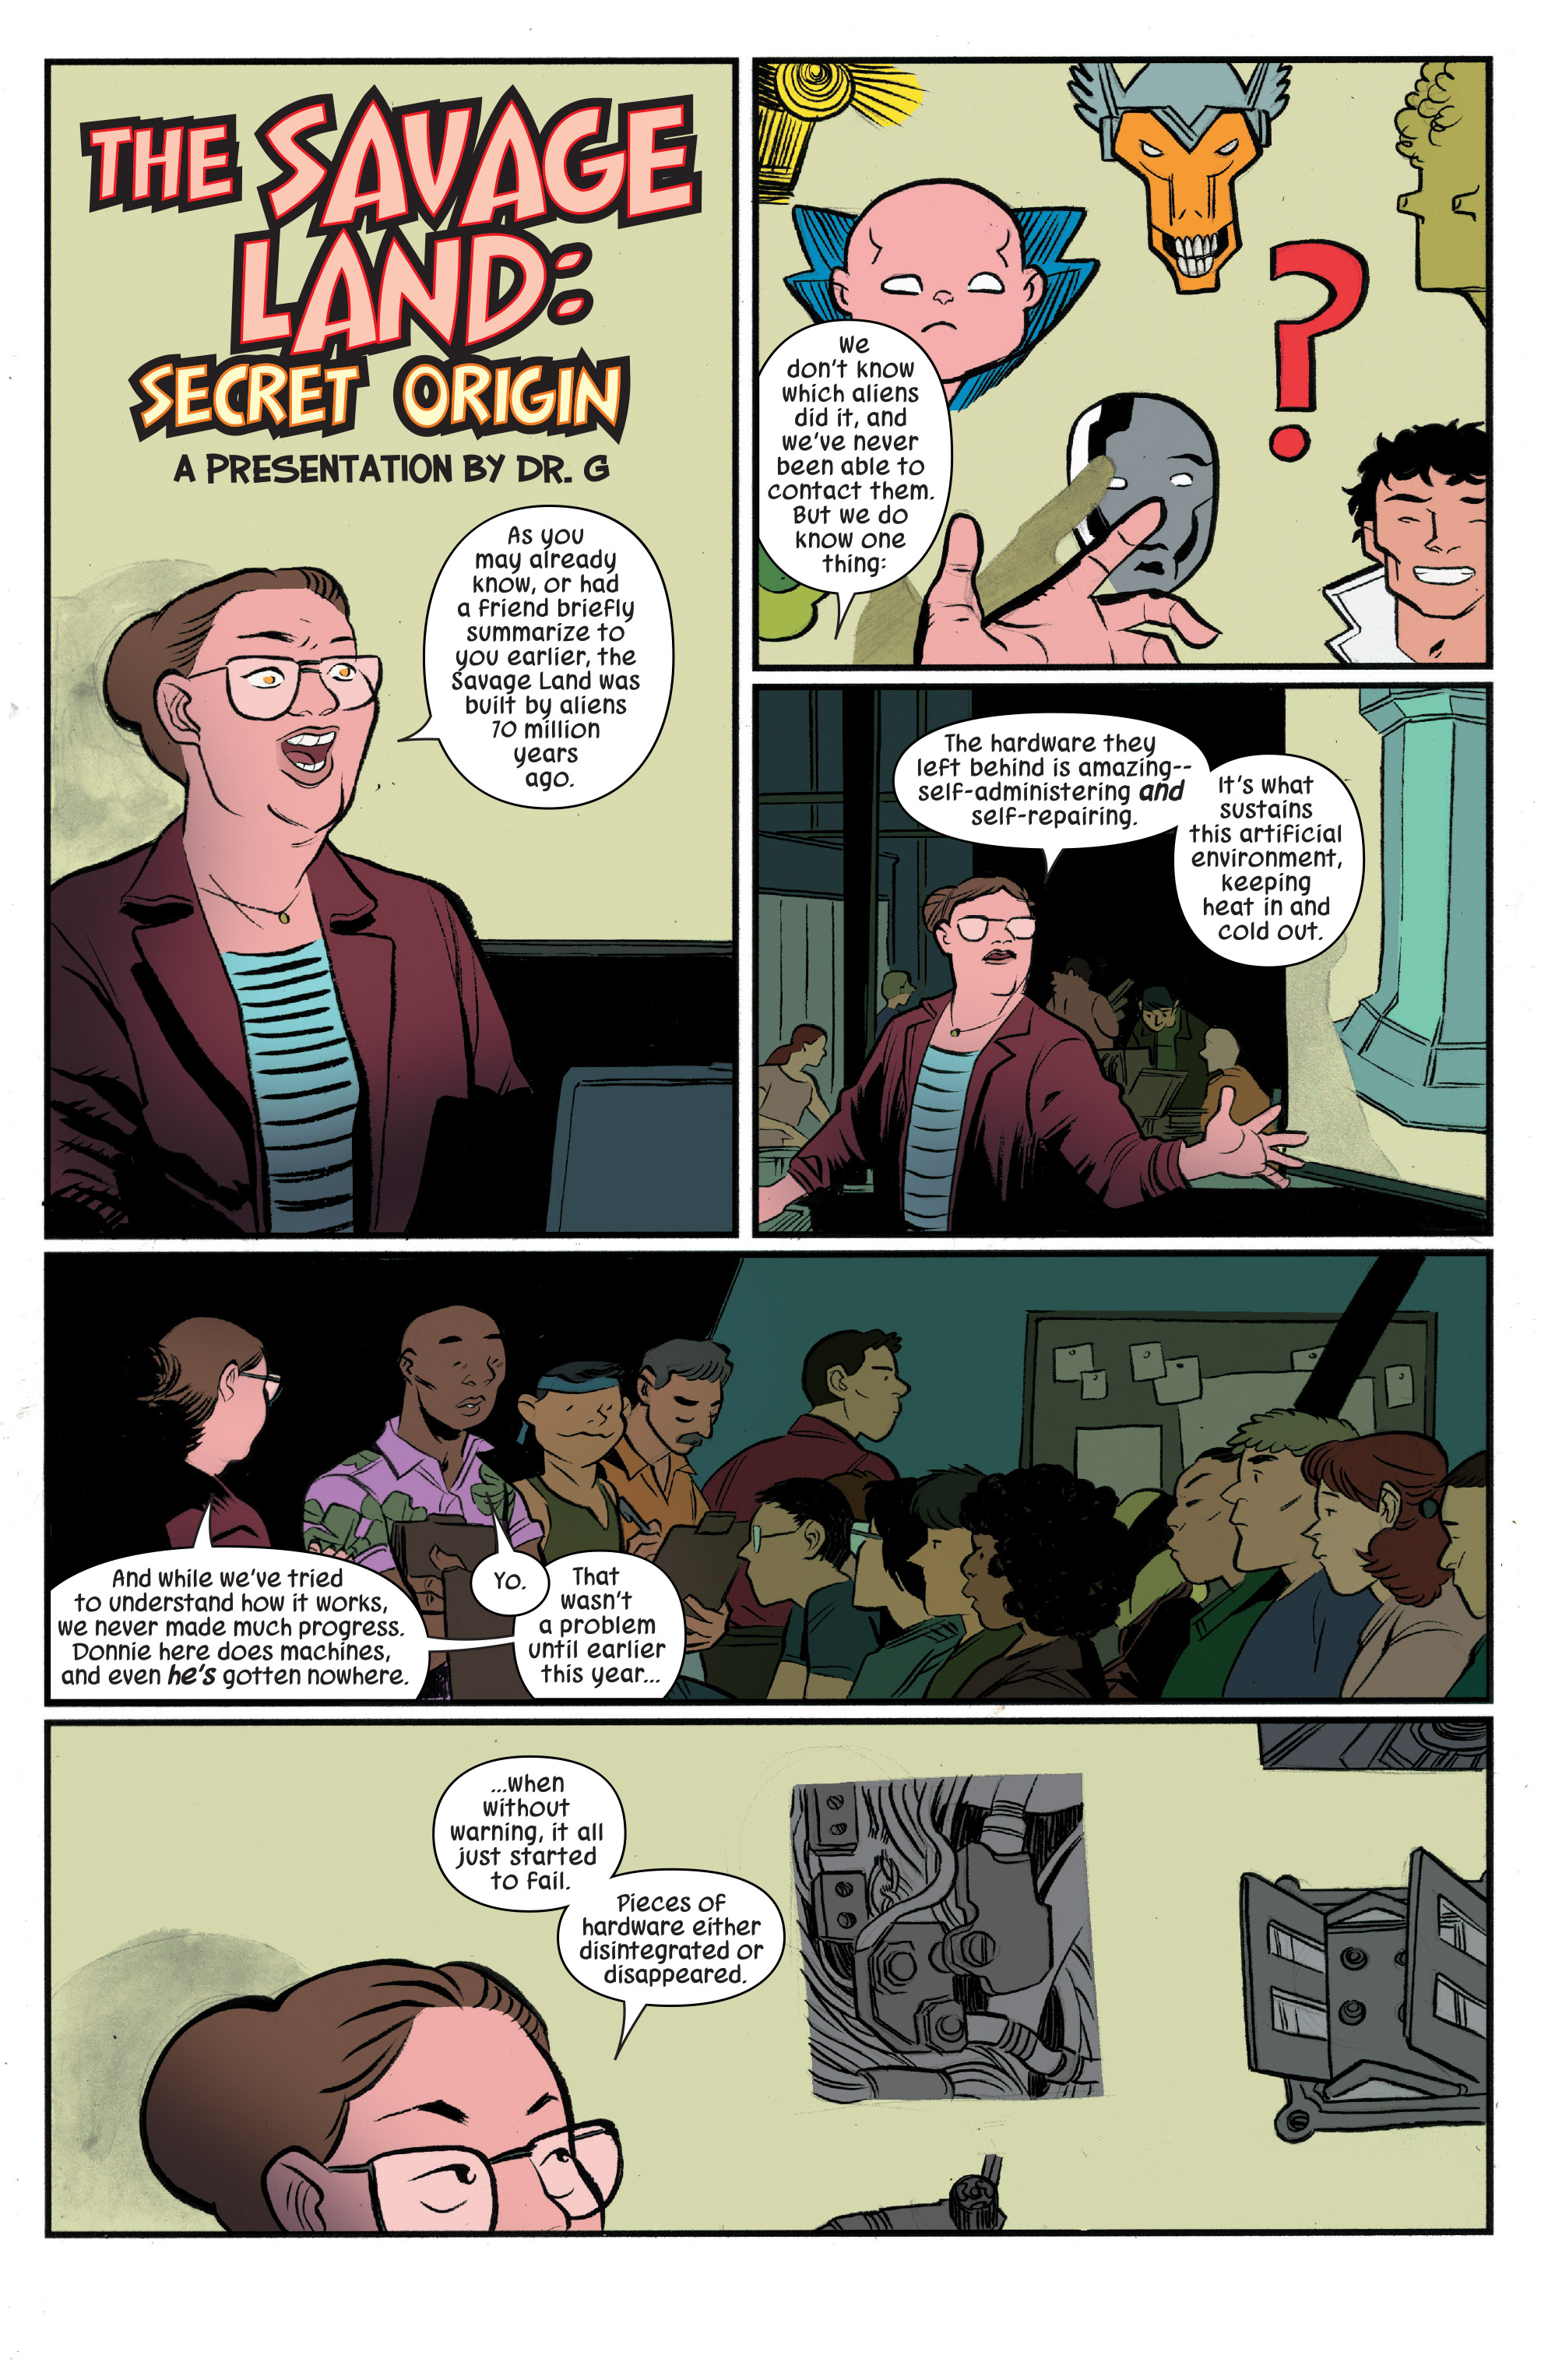 The Unbeatable Squirrel Girl Vol. 2 (2015): Chapter 23 - Page 3